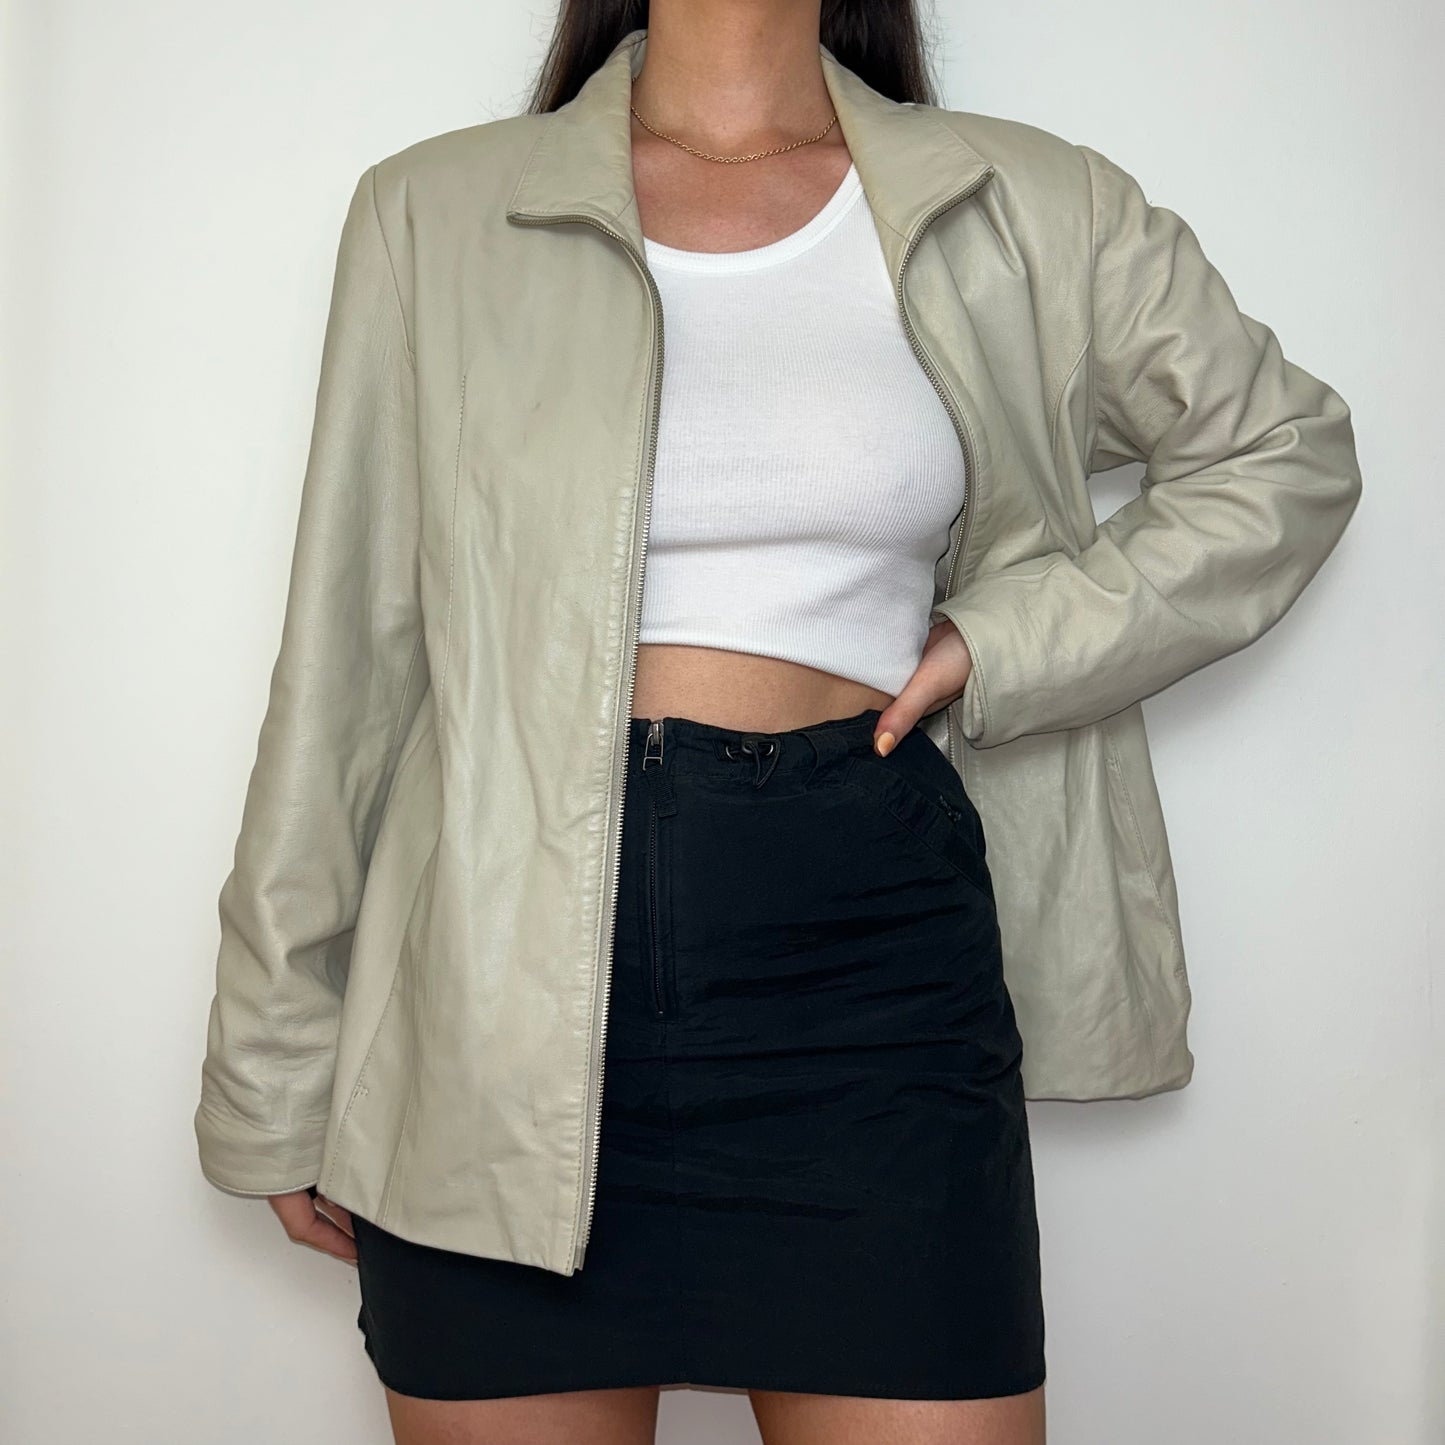 beige leather zip up jacket shown on a model wearing a white crop top and black skirt